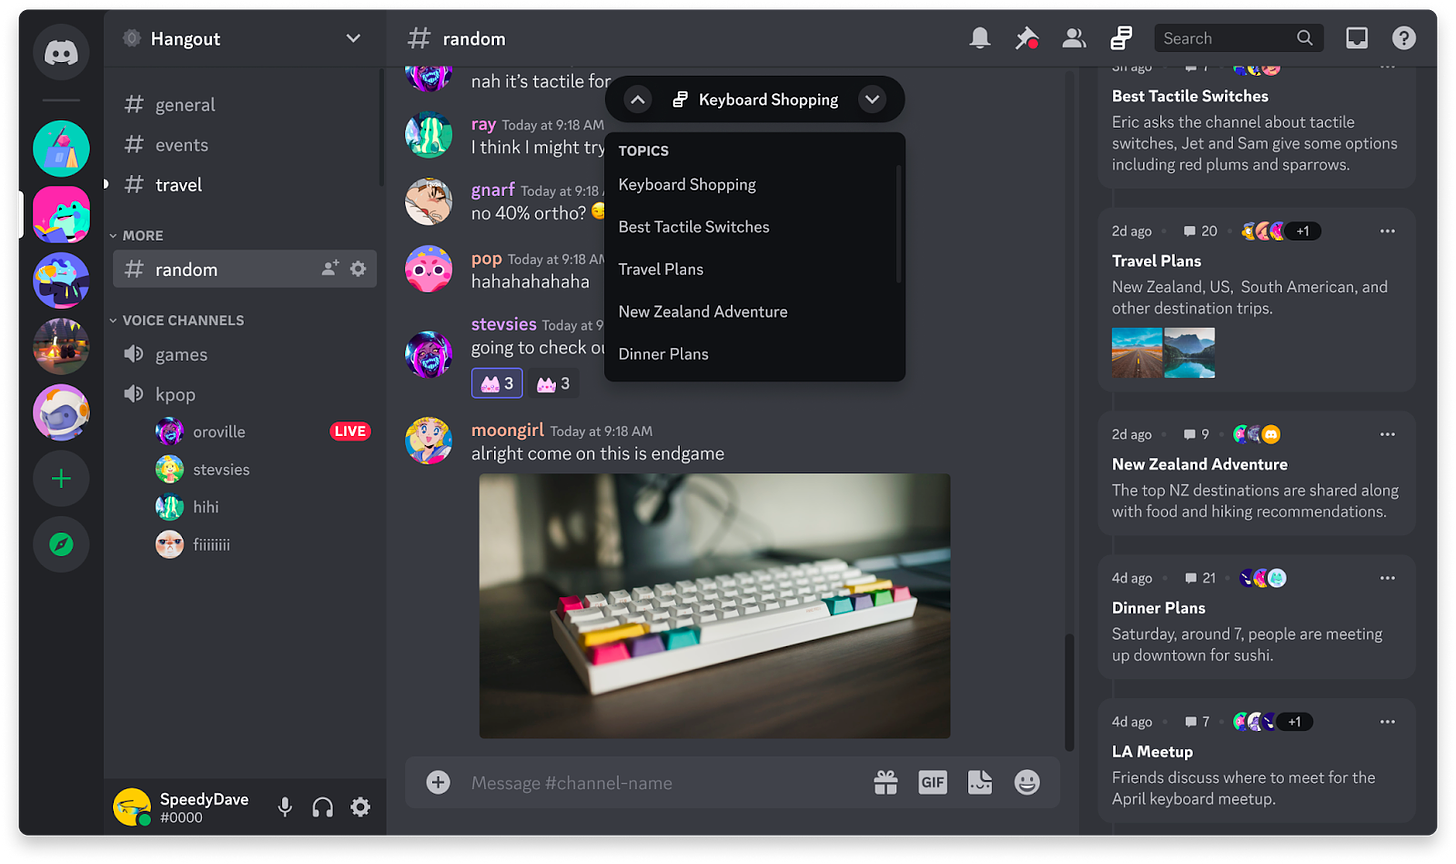 A screenshot of Discord’s Conversation Summaries in action. Conversation topics such as “Keyboard Shopping,” “New Zealand Adventure” and “Dinner Plans” are shown.